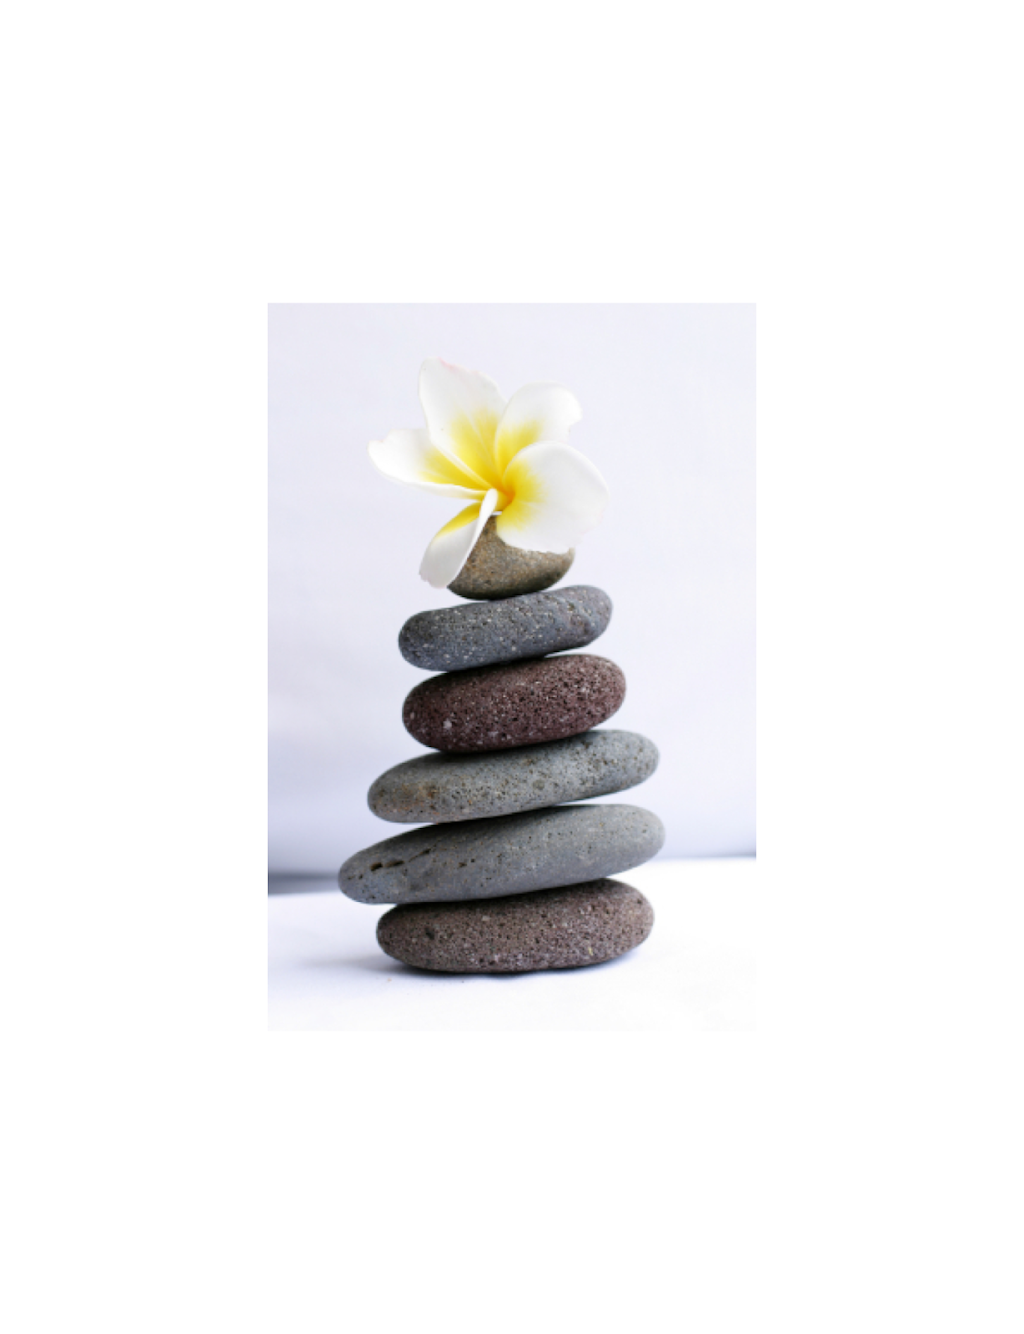 CORE-do Wellness Spa | 9 Spring Rd, Valley Cottage, NY 10989 | Phone: (845) 267-4624